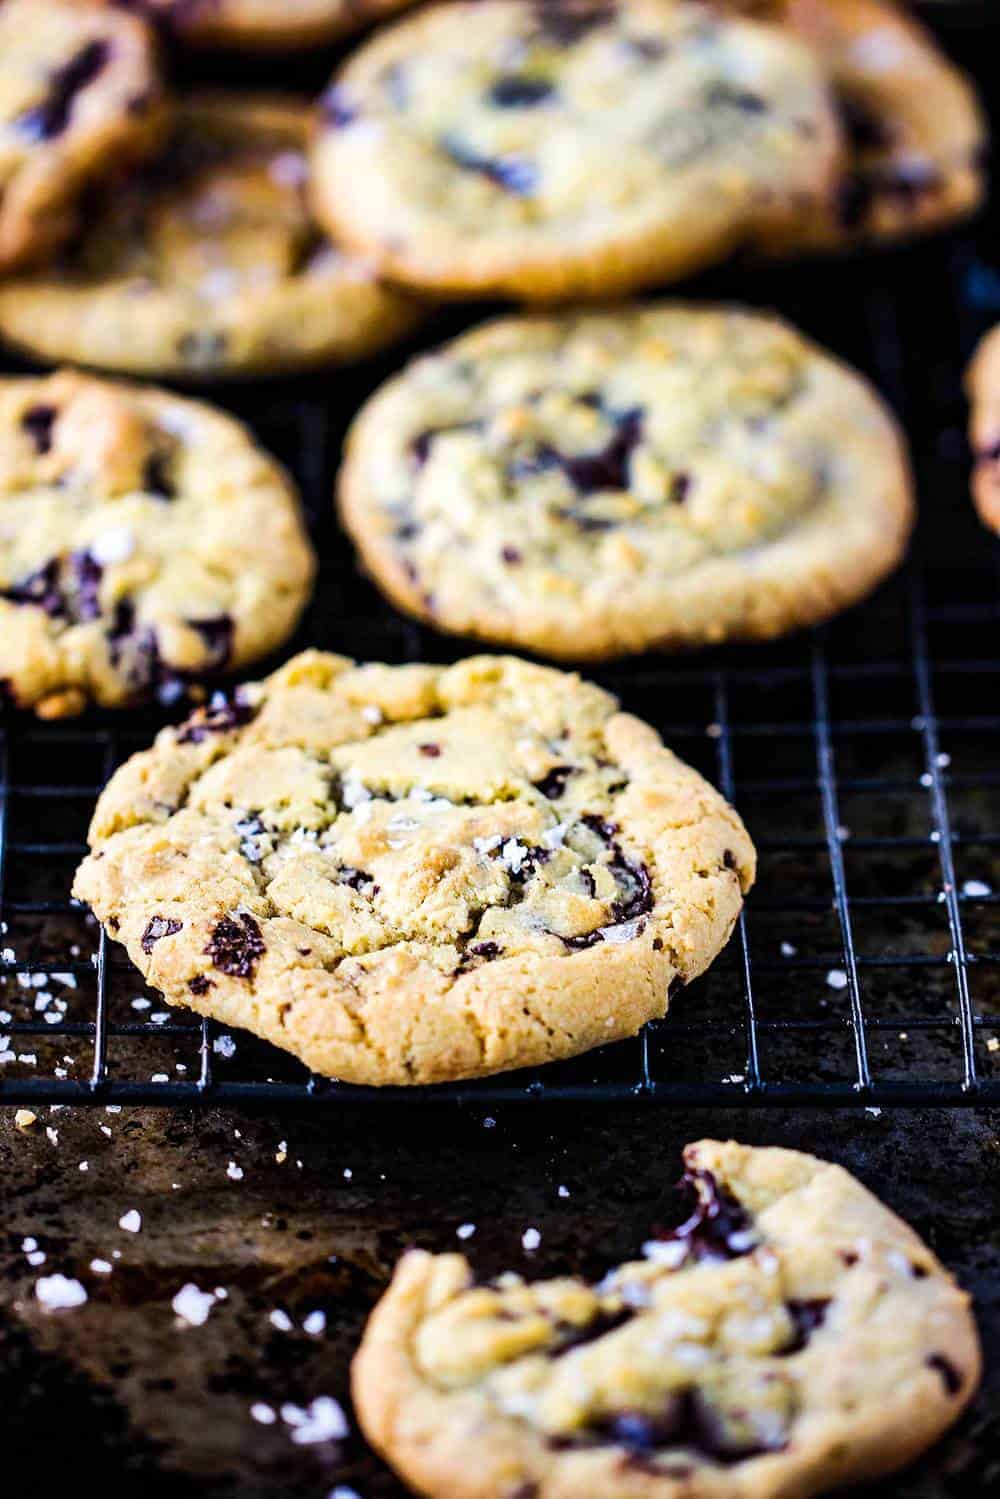 Classic chocolate chunk cookies on a wire rack